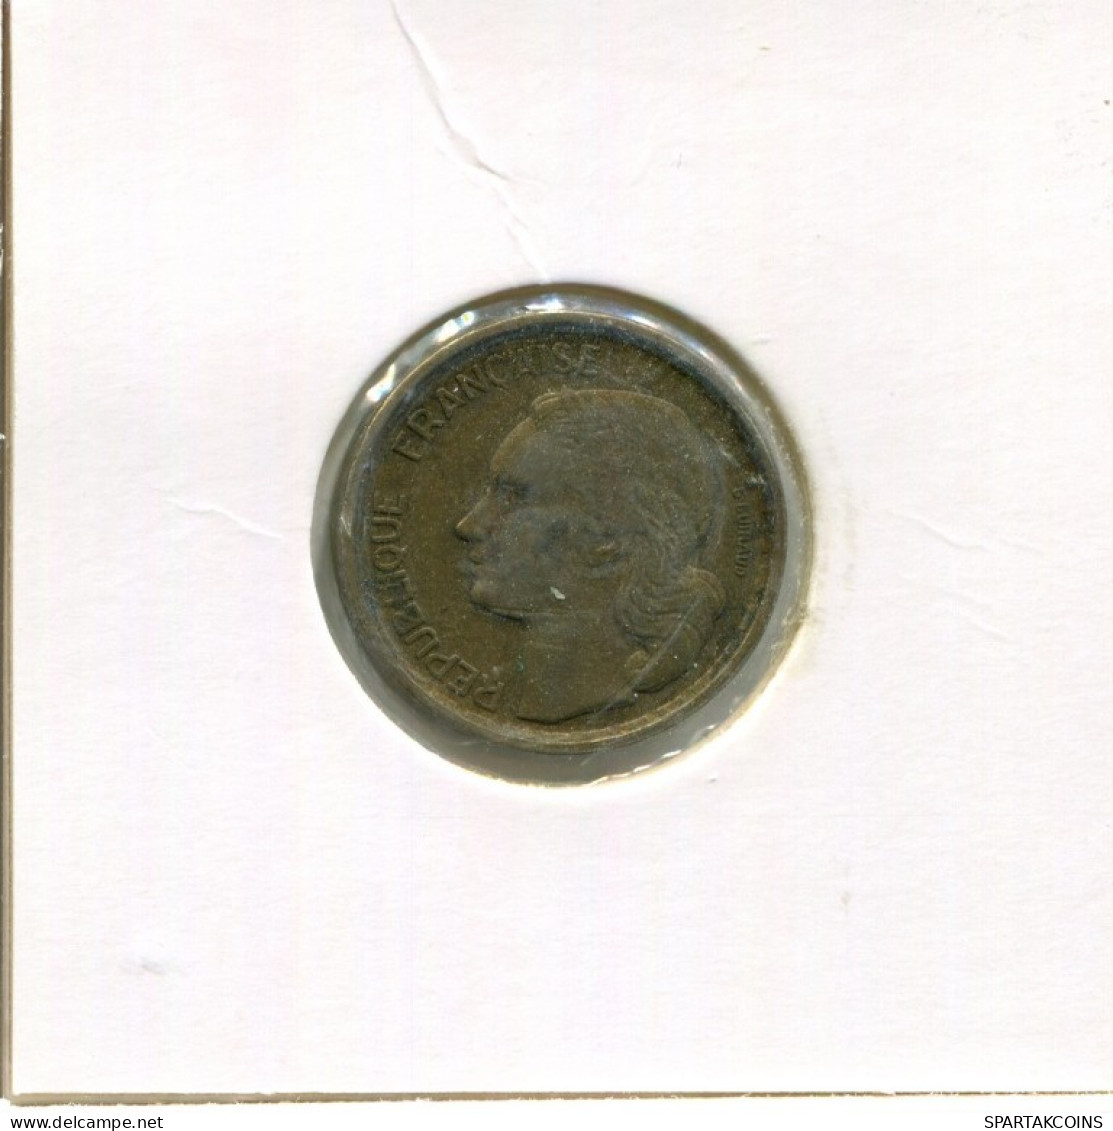 10 FRANCS 1958 FRANCE Coin French Coin #AN433.U.A - 10 Francs